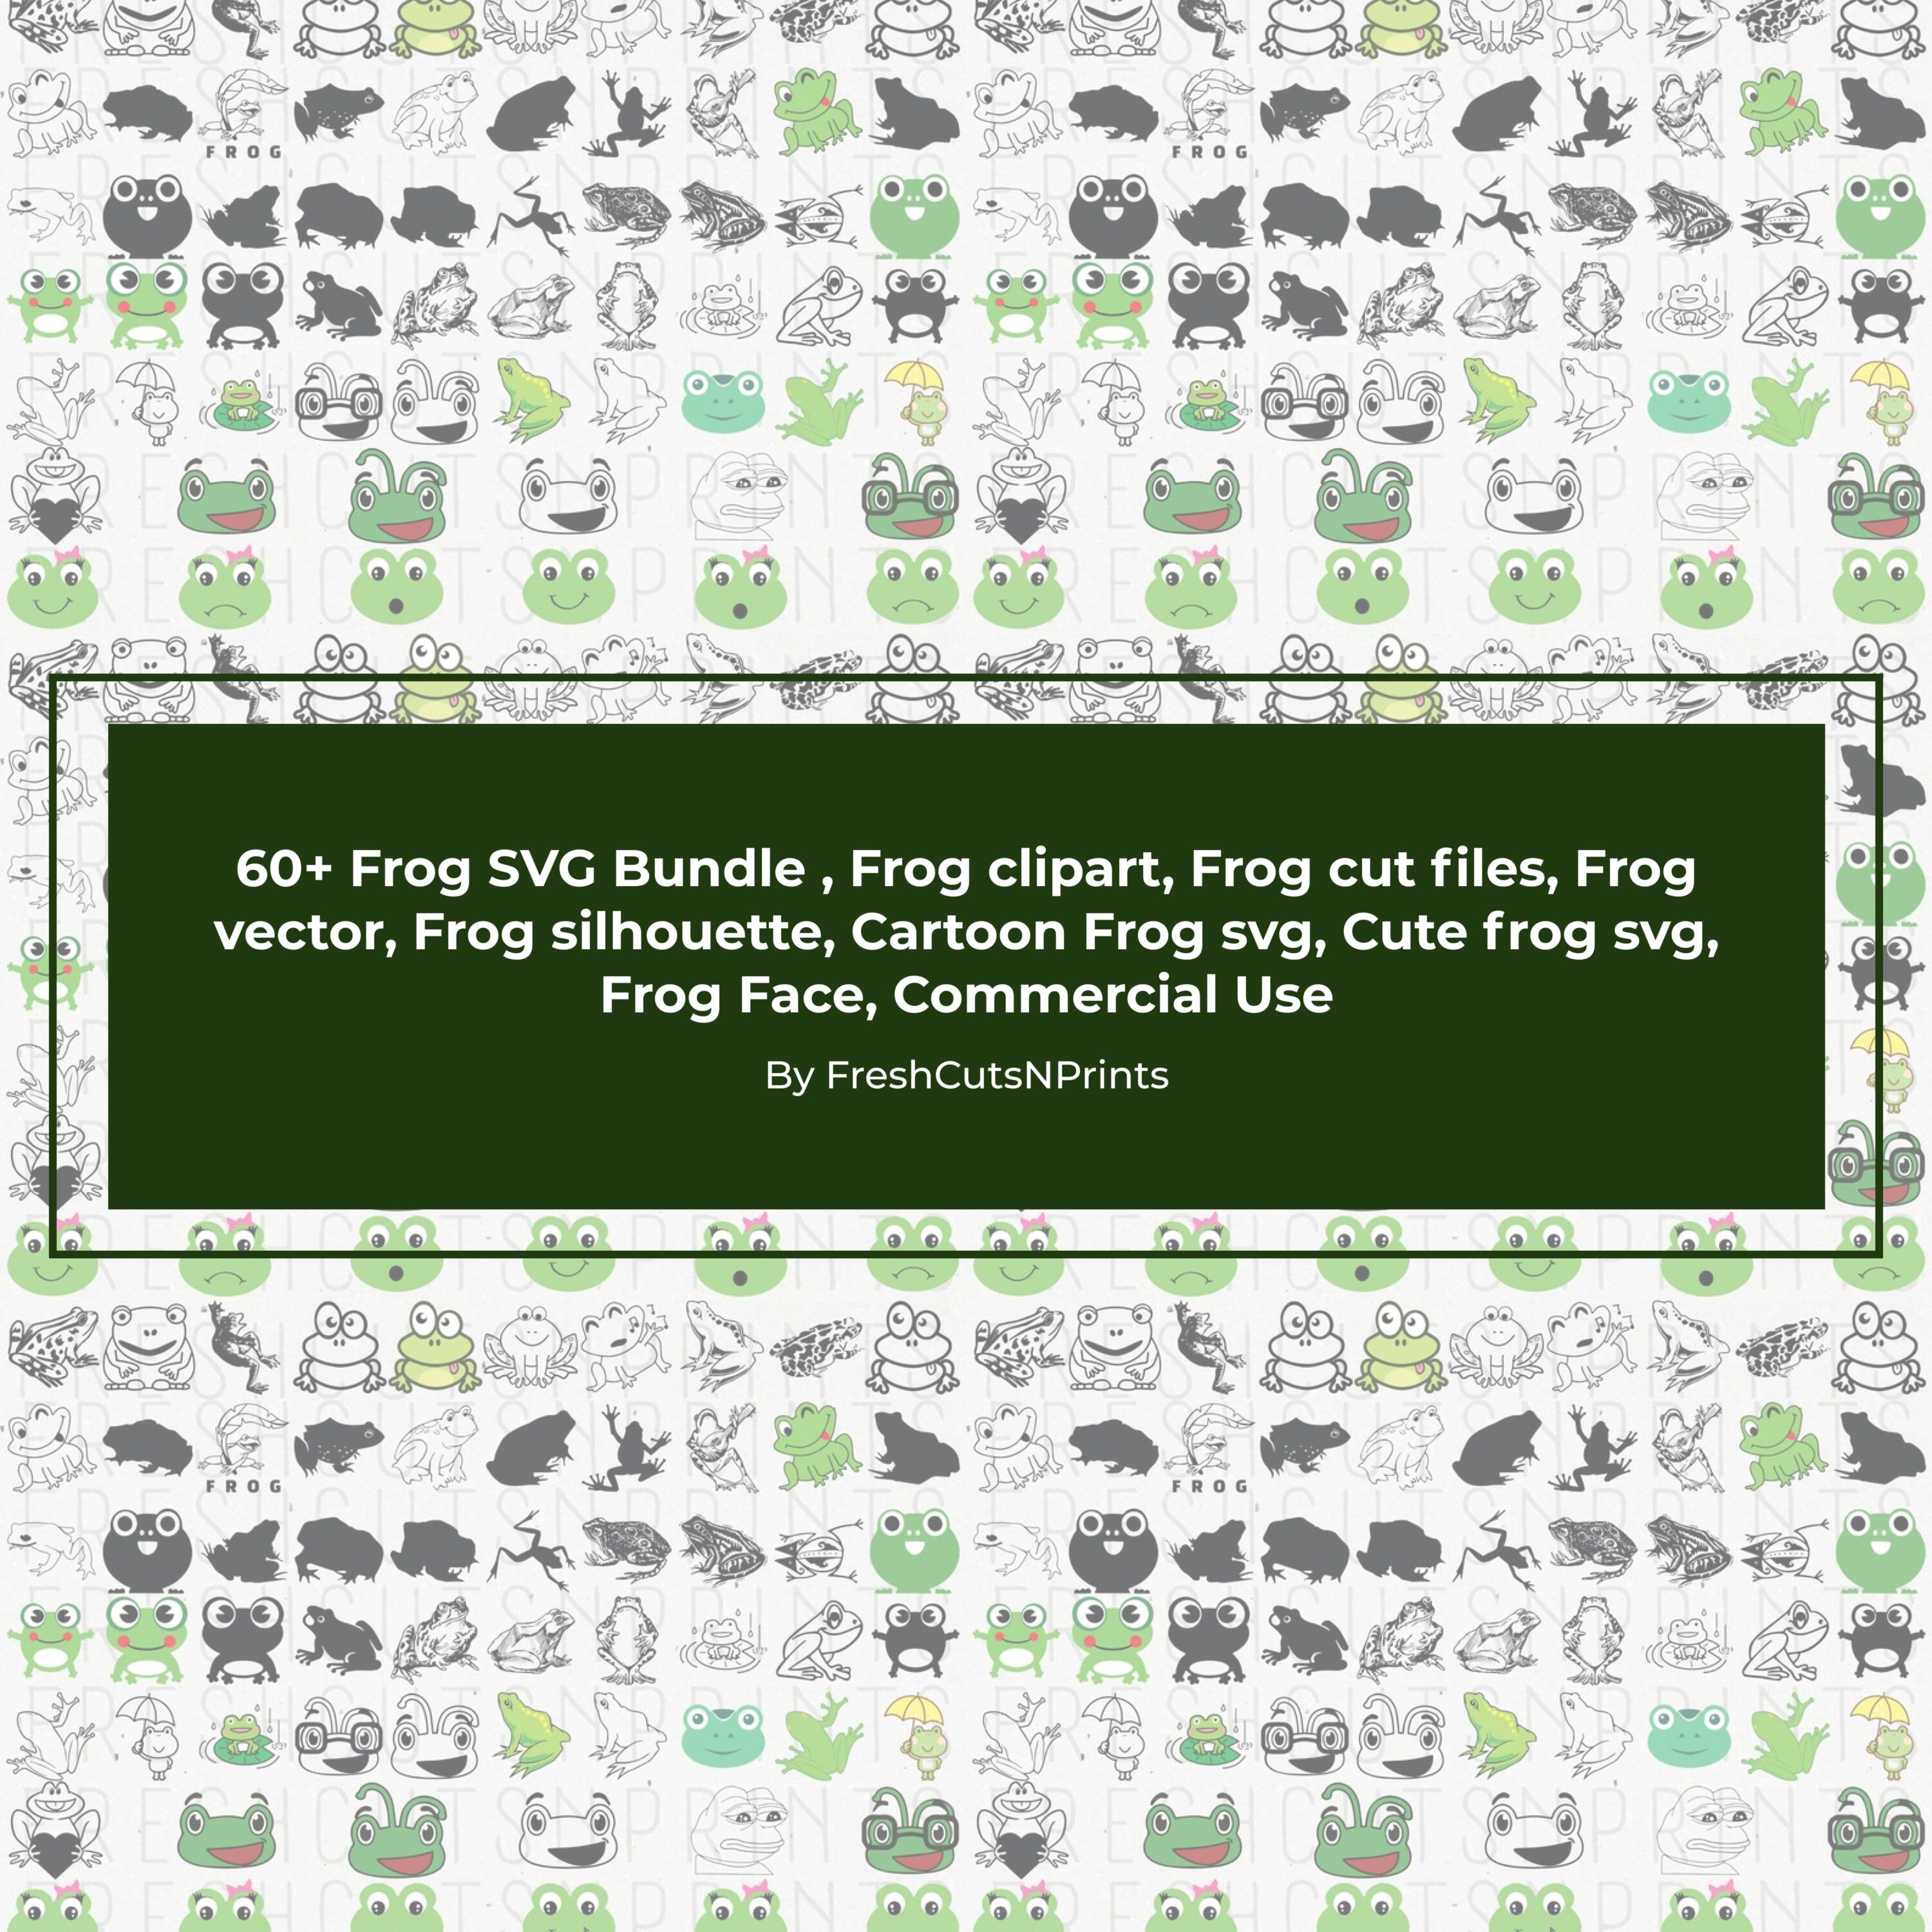 Green and white background with cartoon animals.